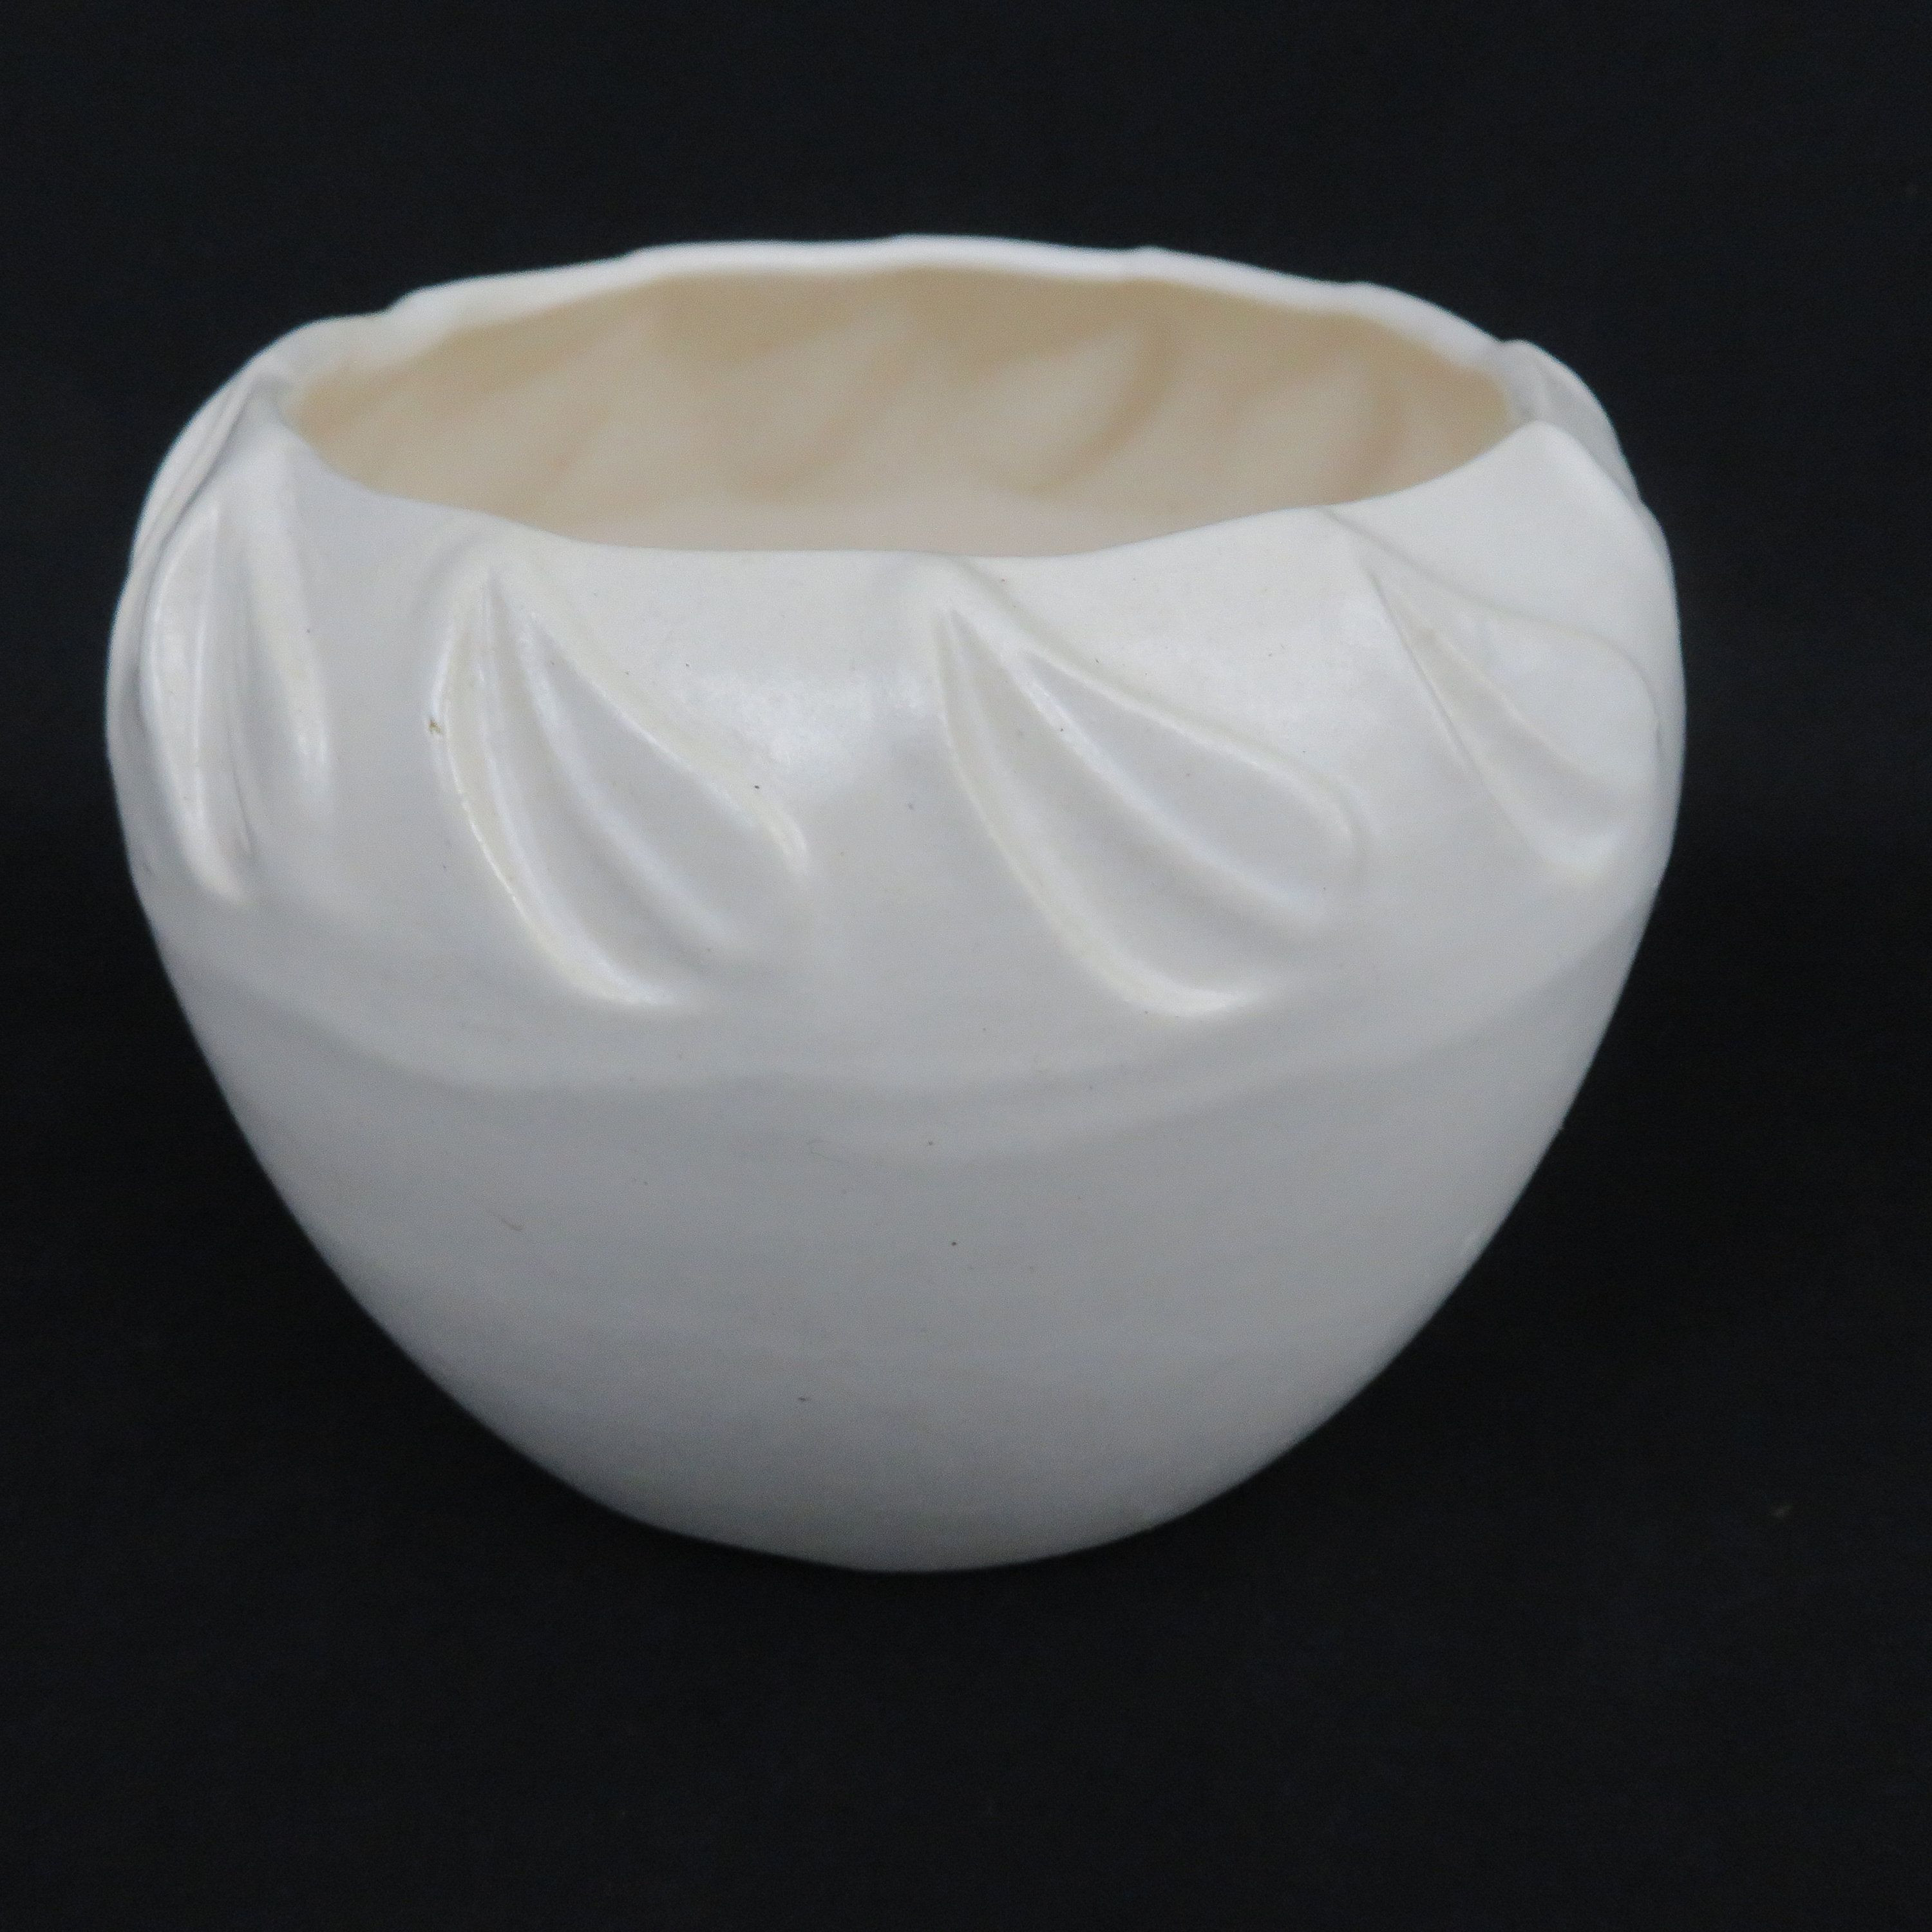 off white vase of vintage off white usa pottery planter flower pot or vase with leaf within vintage off white usa pottery planter flower pot or vase with leaf rim antique from 1940s